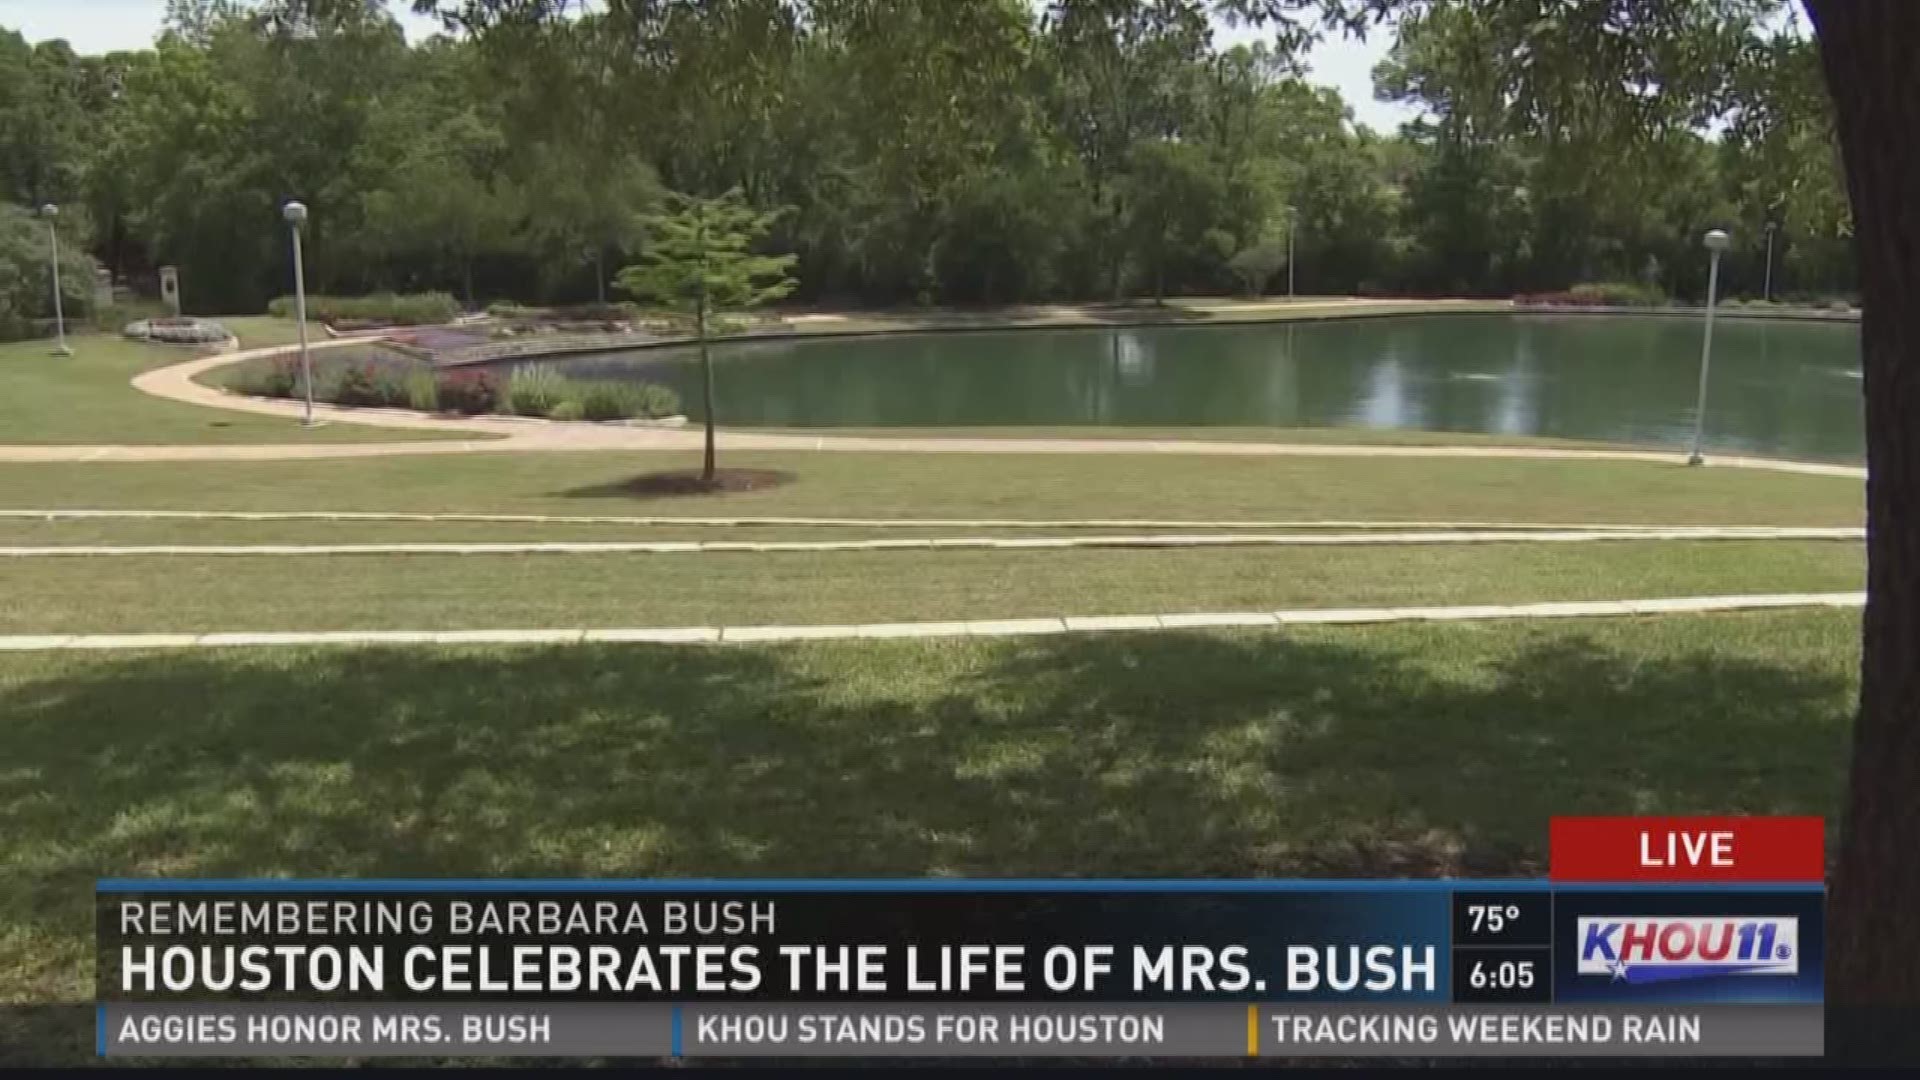 The former First Lady Barbara Bush will be buried at Texas A&M University in College Station on Saturday. 